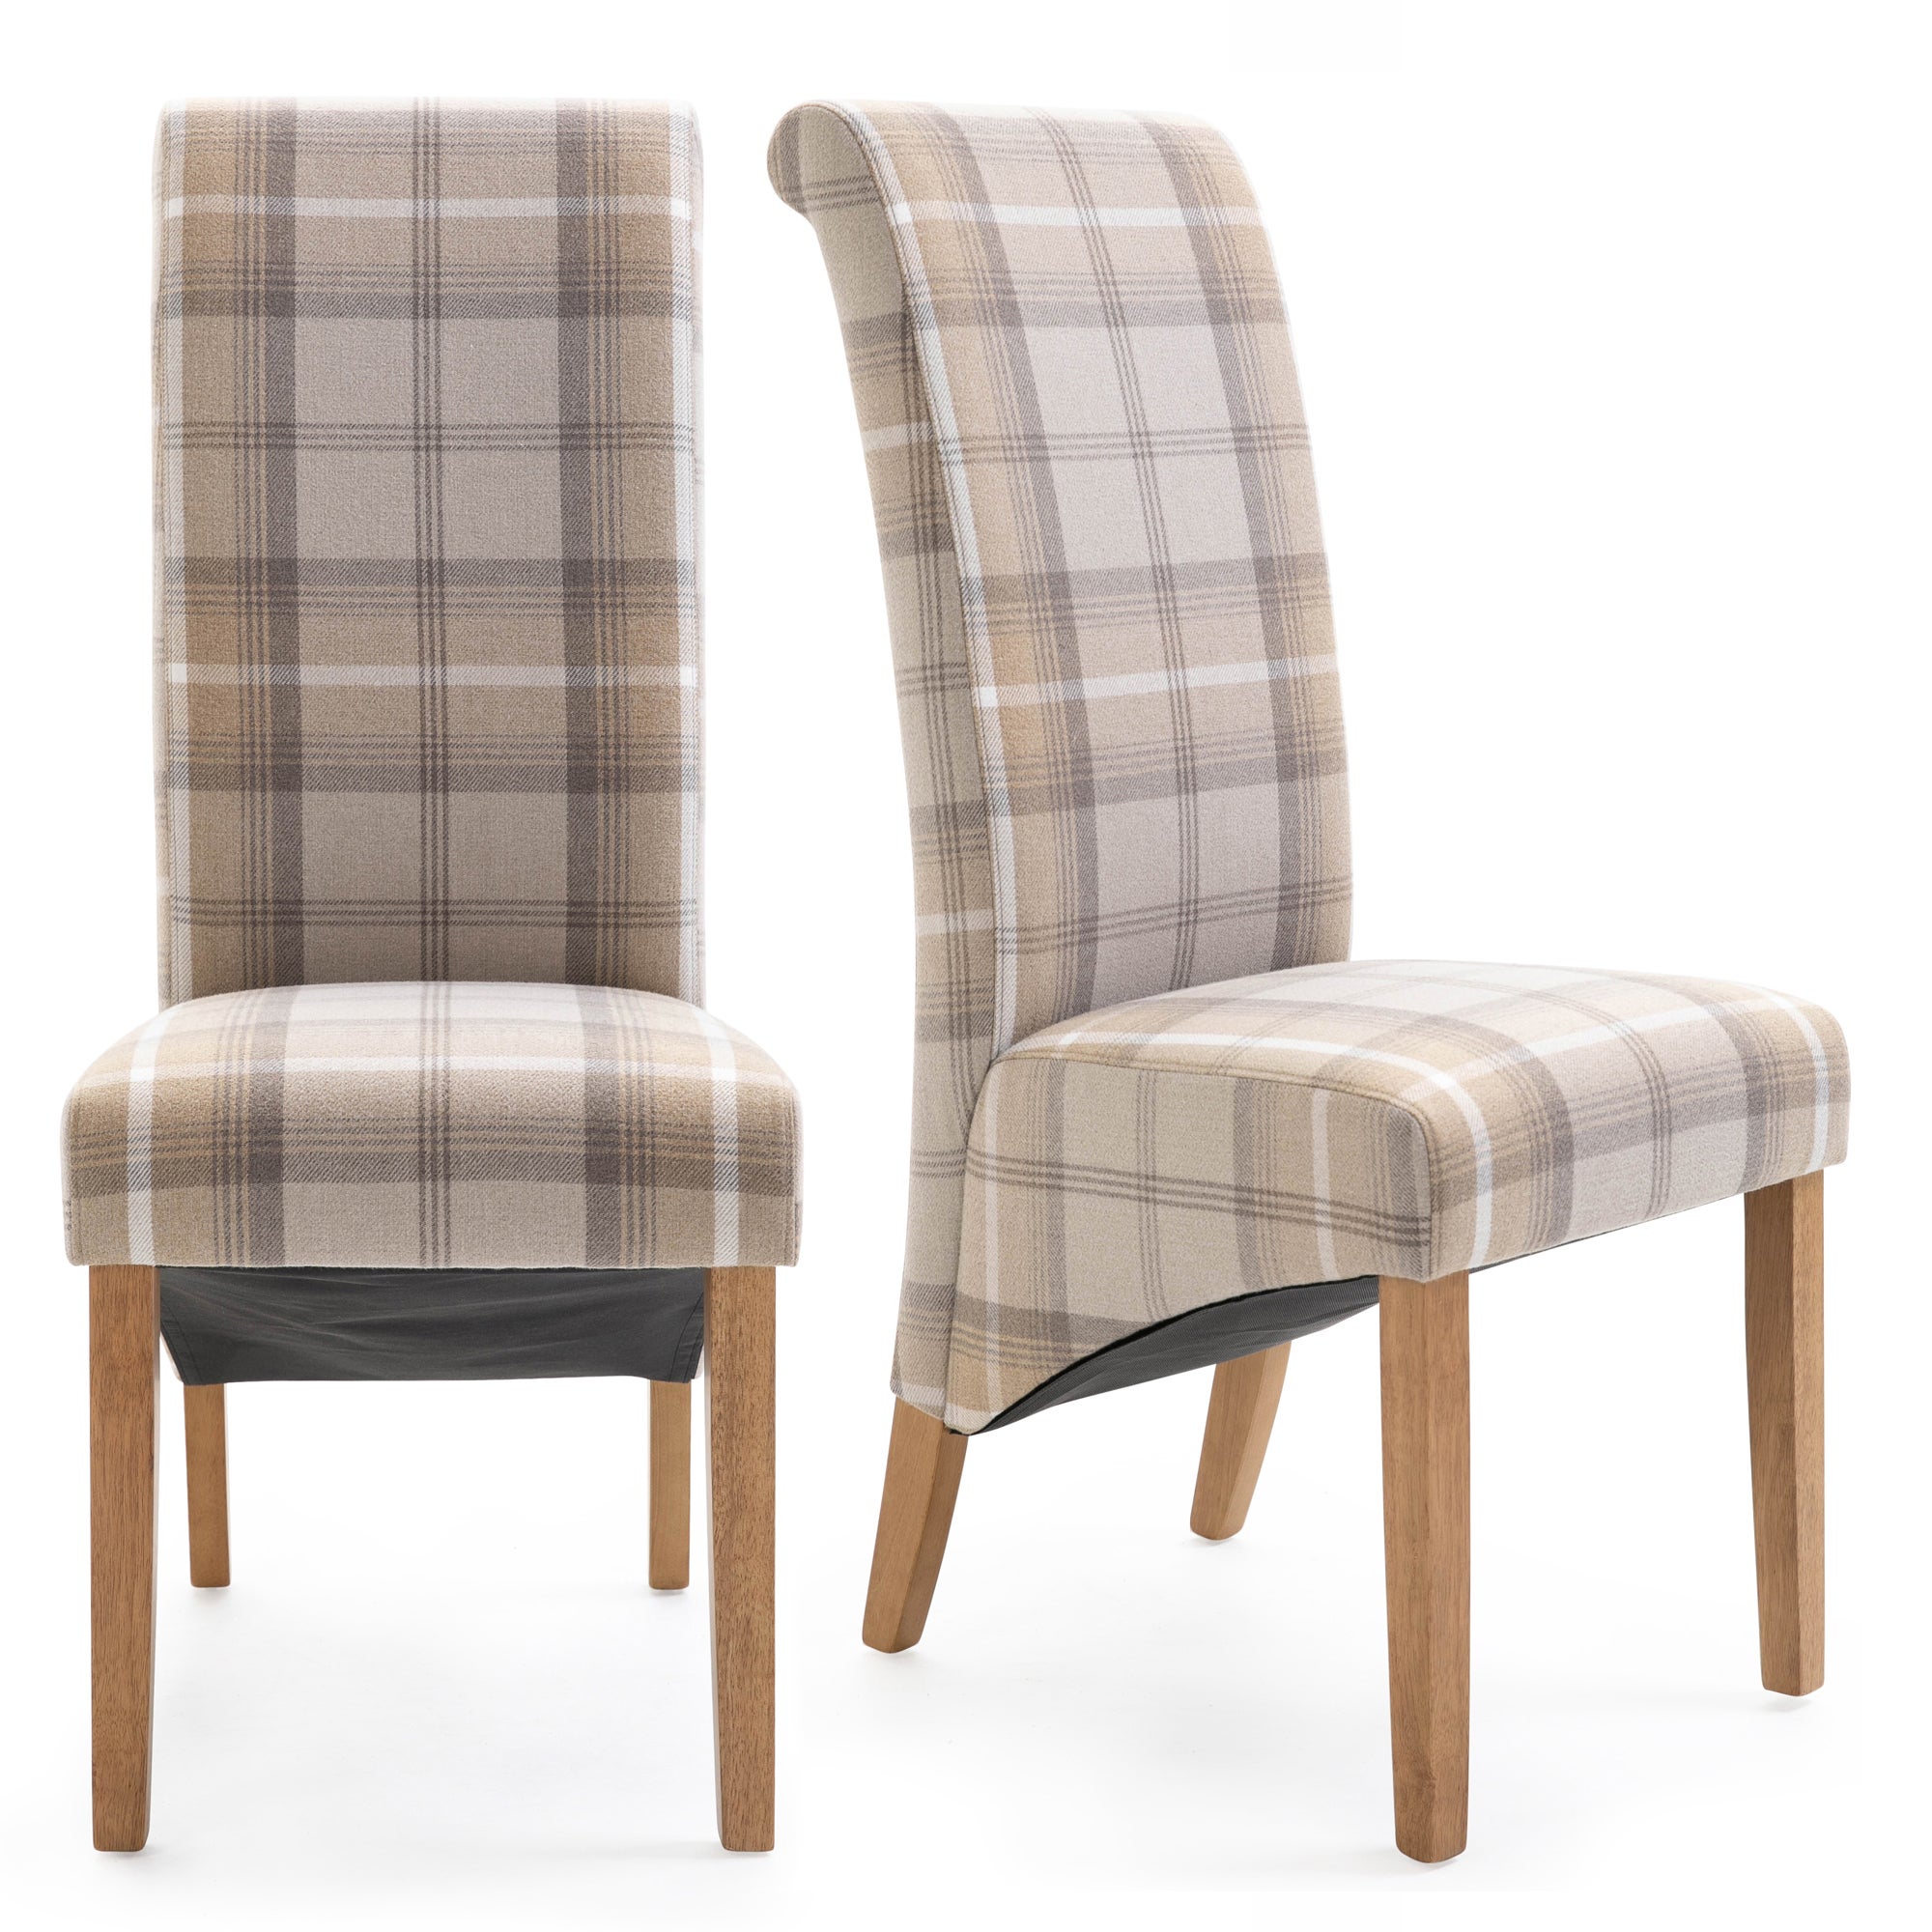 Chester Set Of 2 Dining Chairs Woven Check Fabric Brown And White